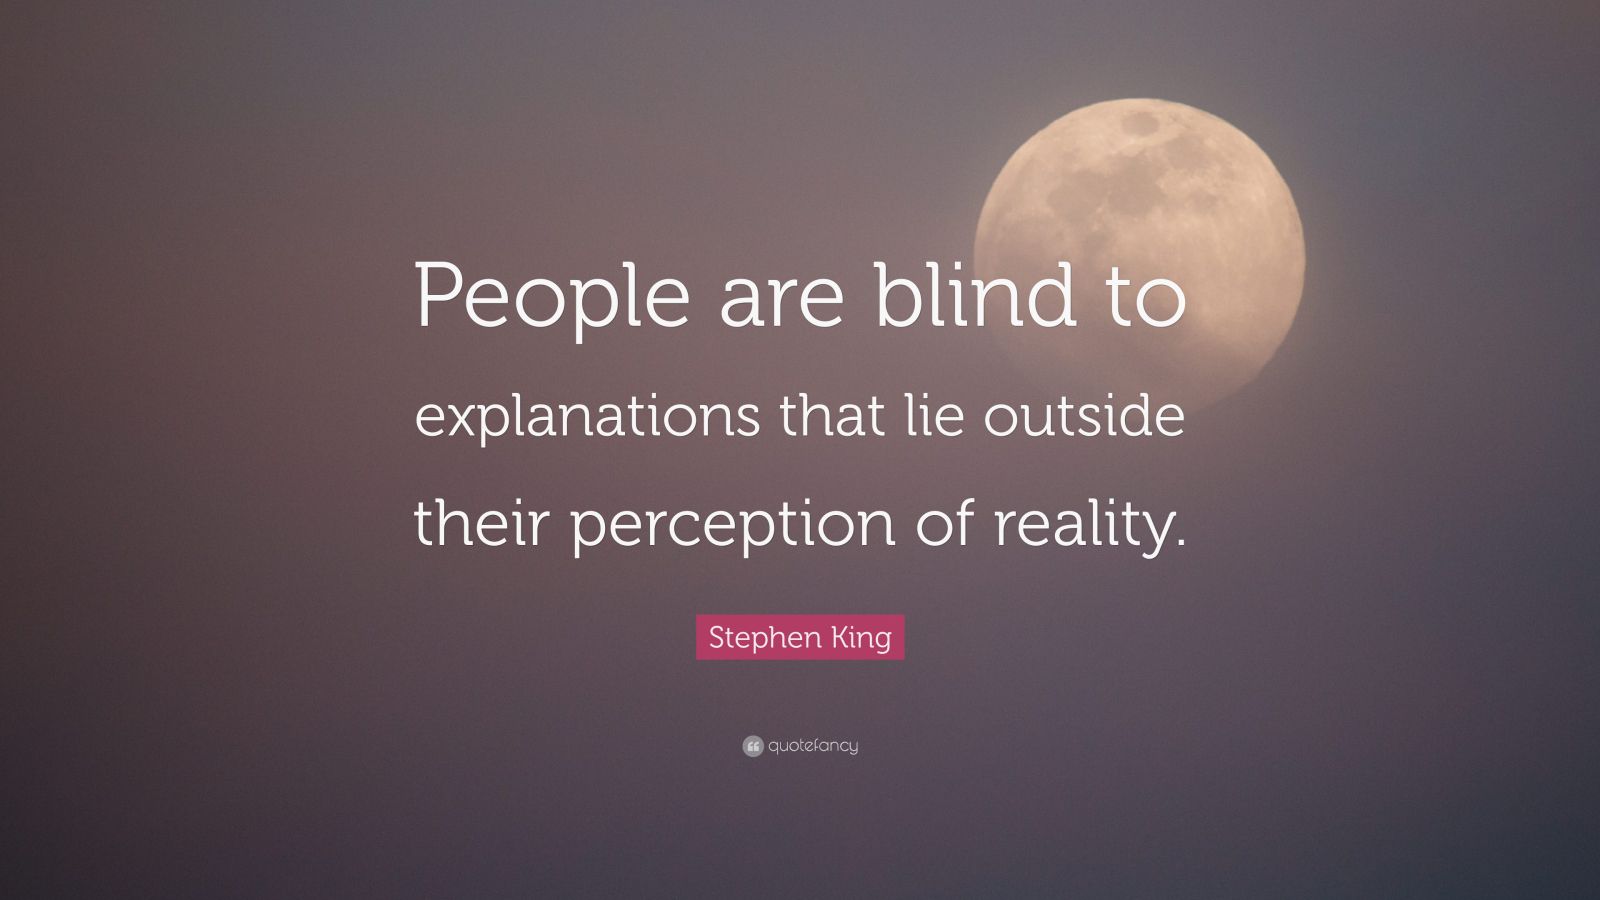 Stephen King Quote: “People are blind to explanations that lie outside ...